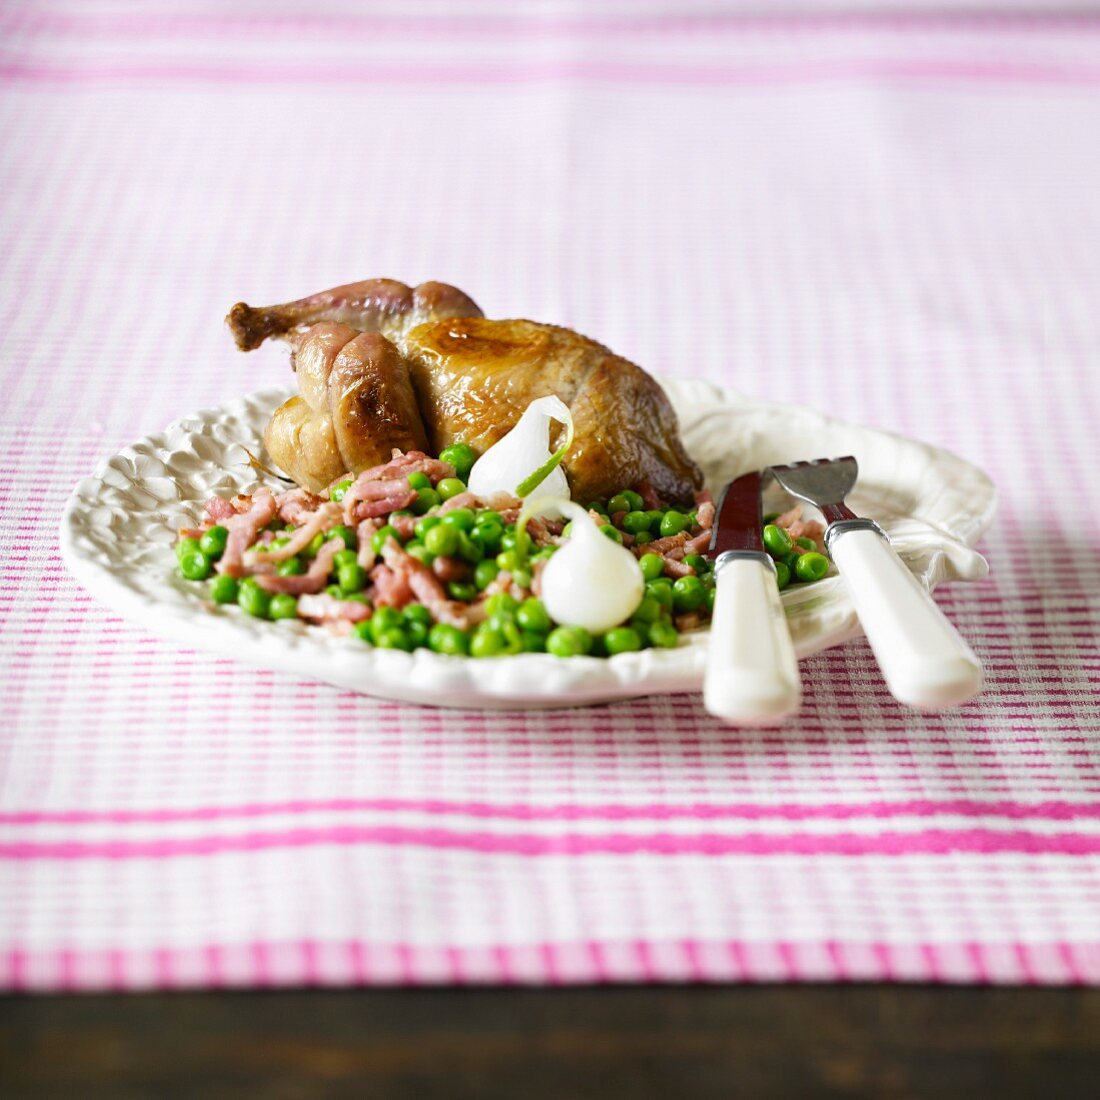 Pigeon with peas